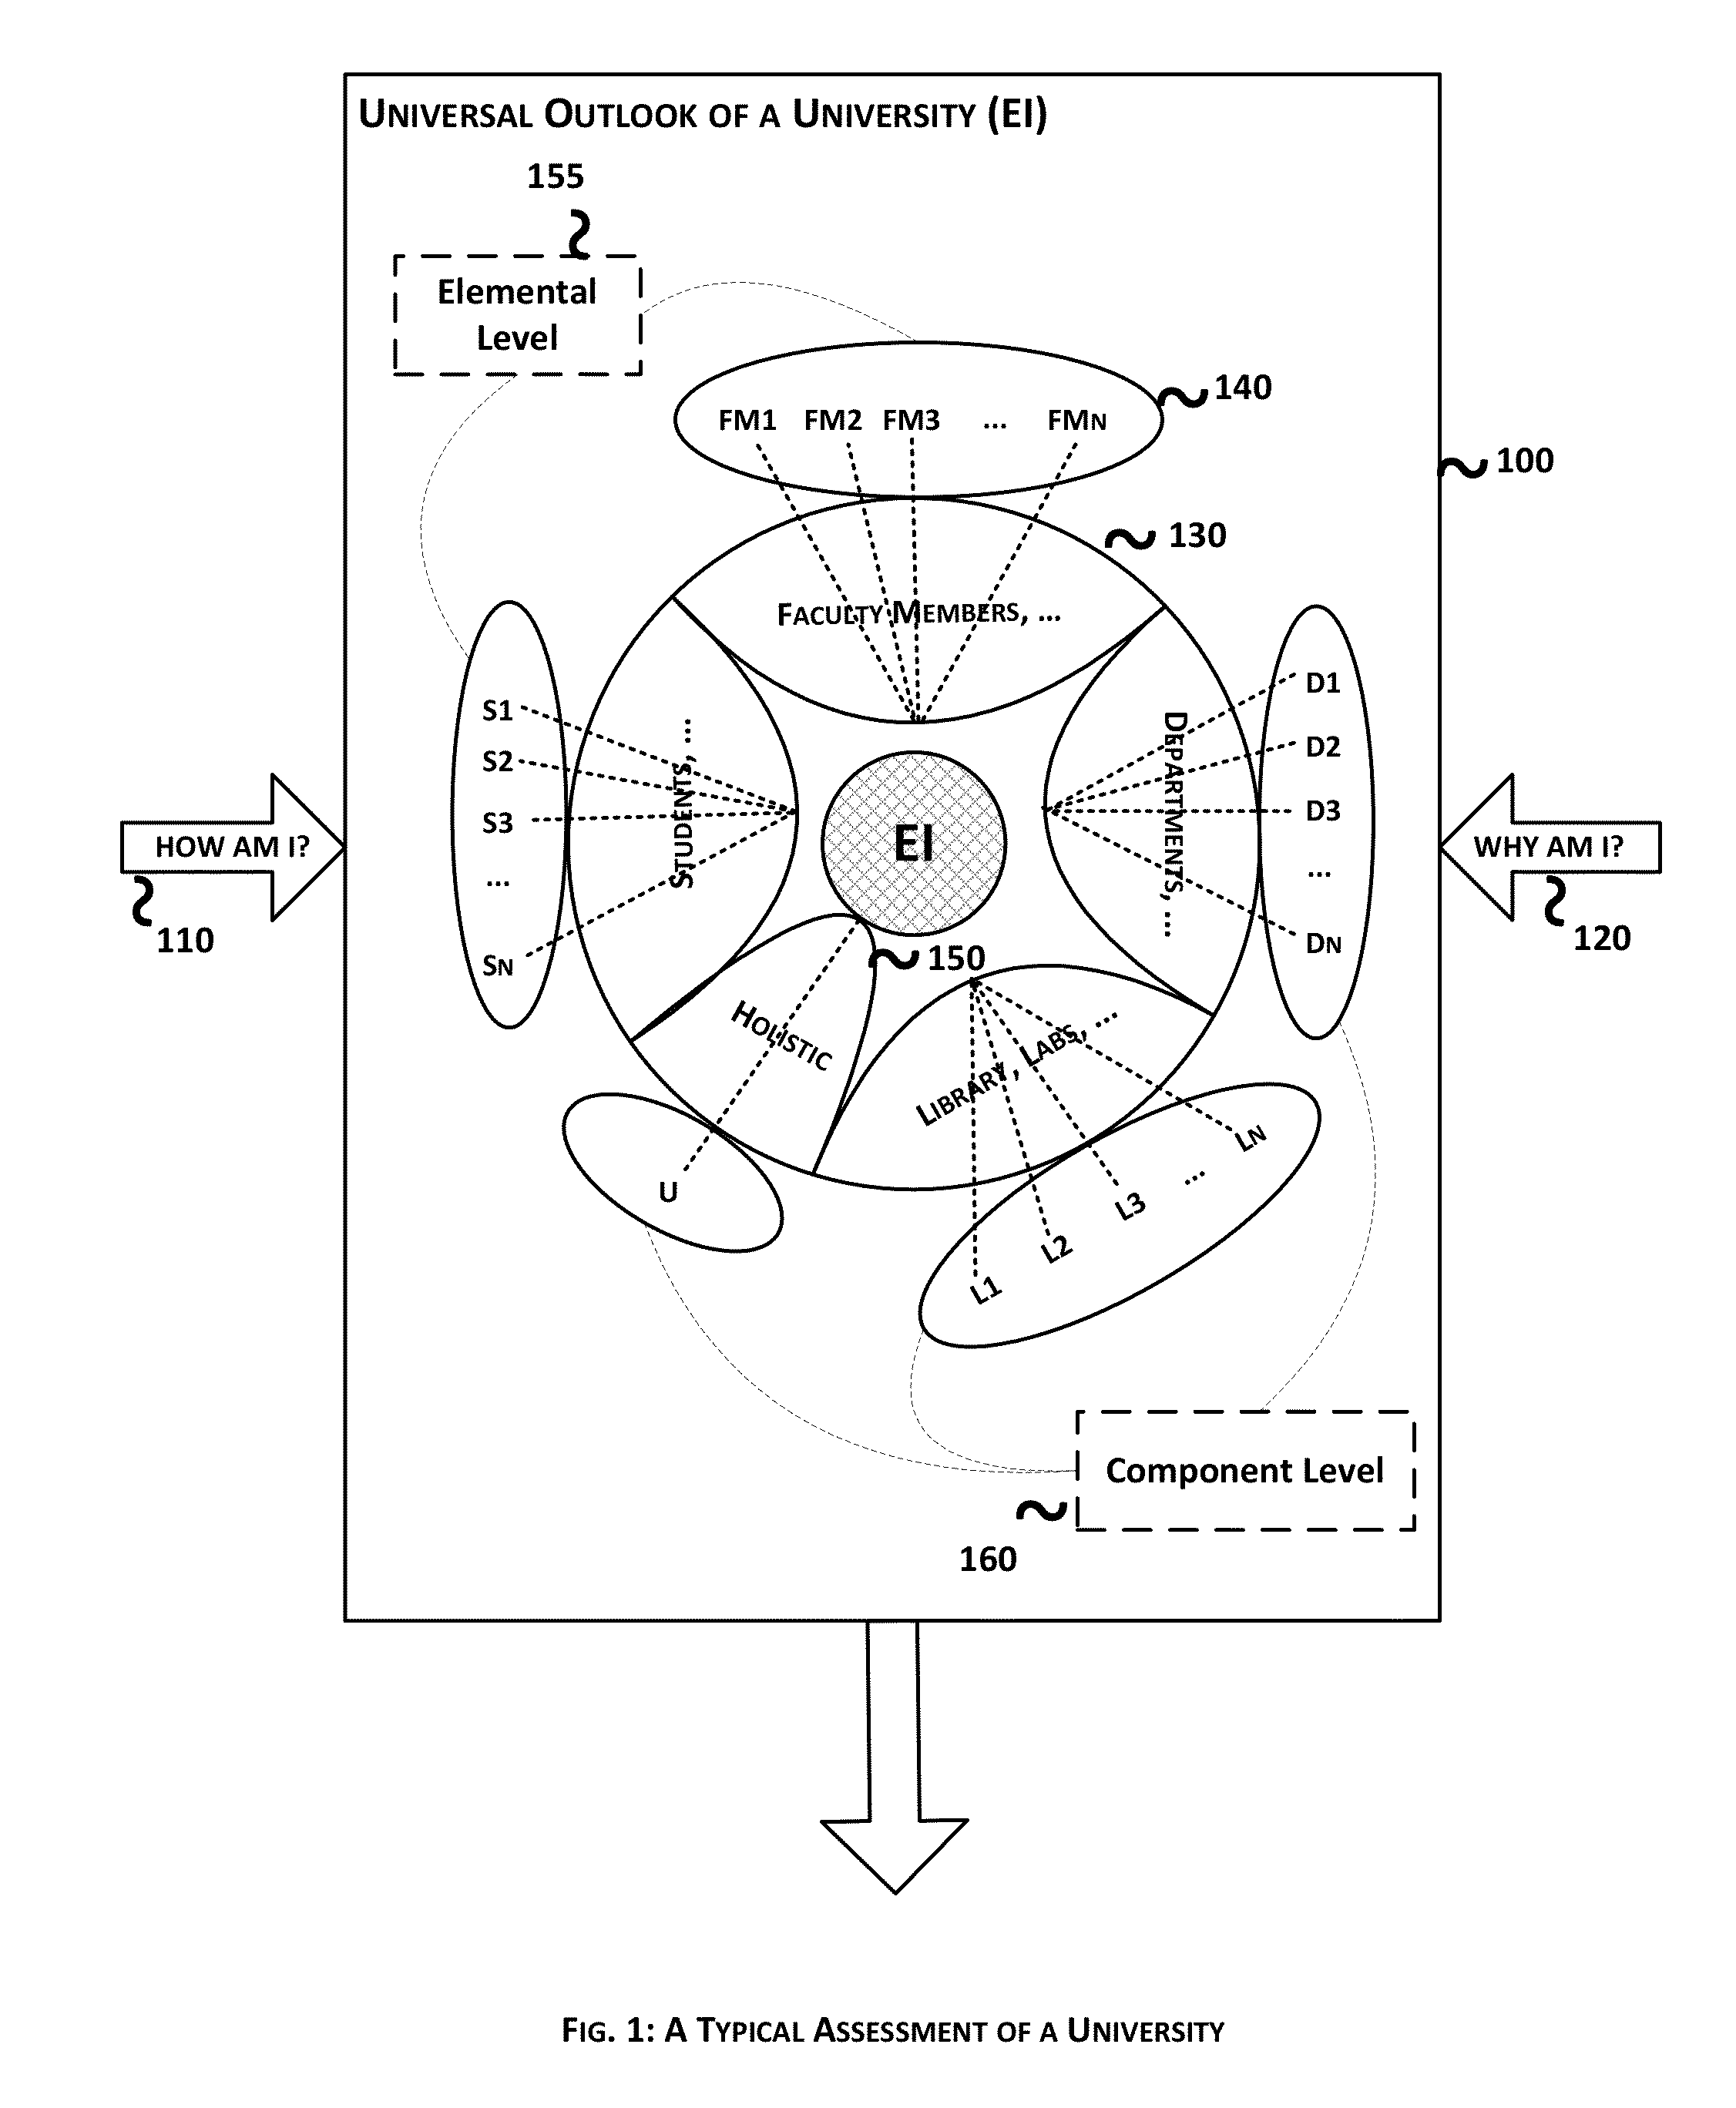 System and Method for Generating Student Activity Flows in a University